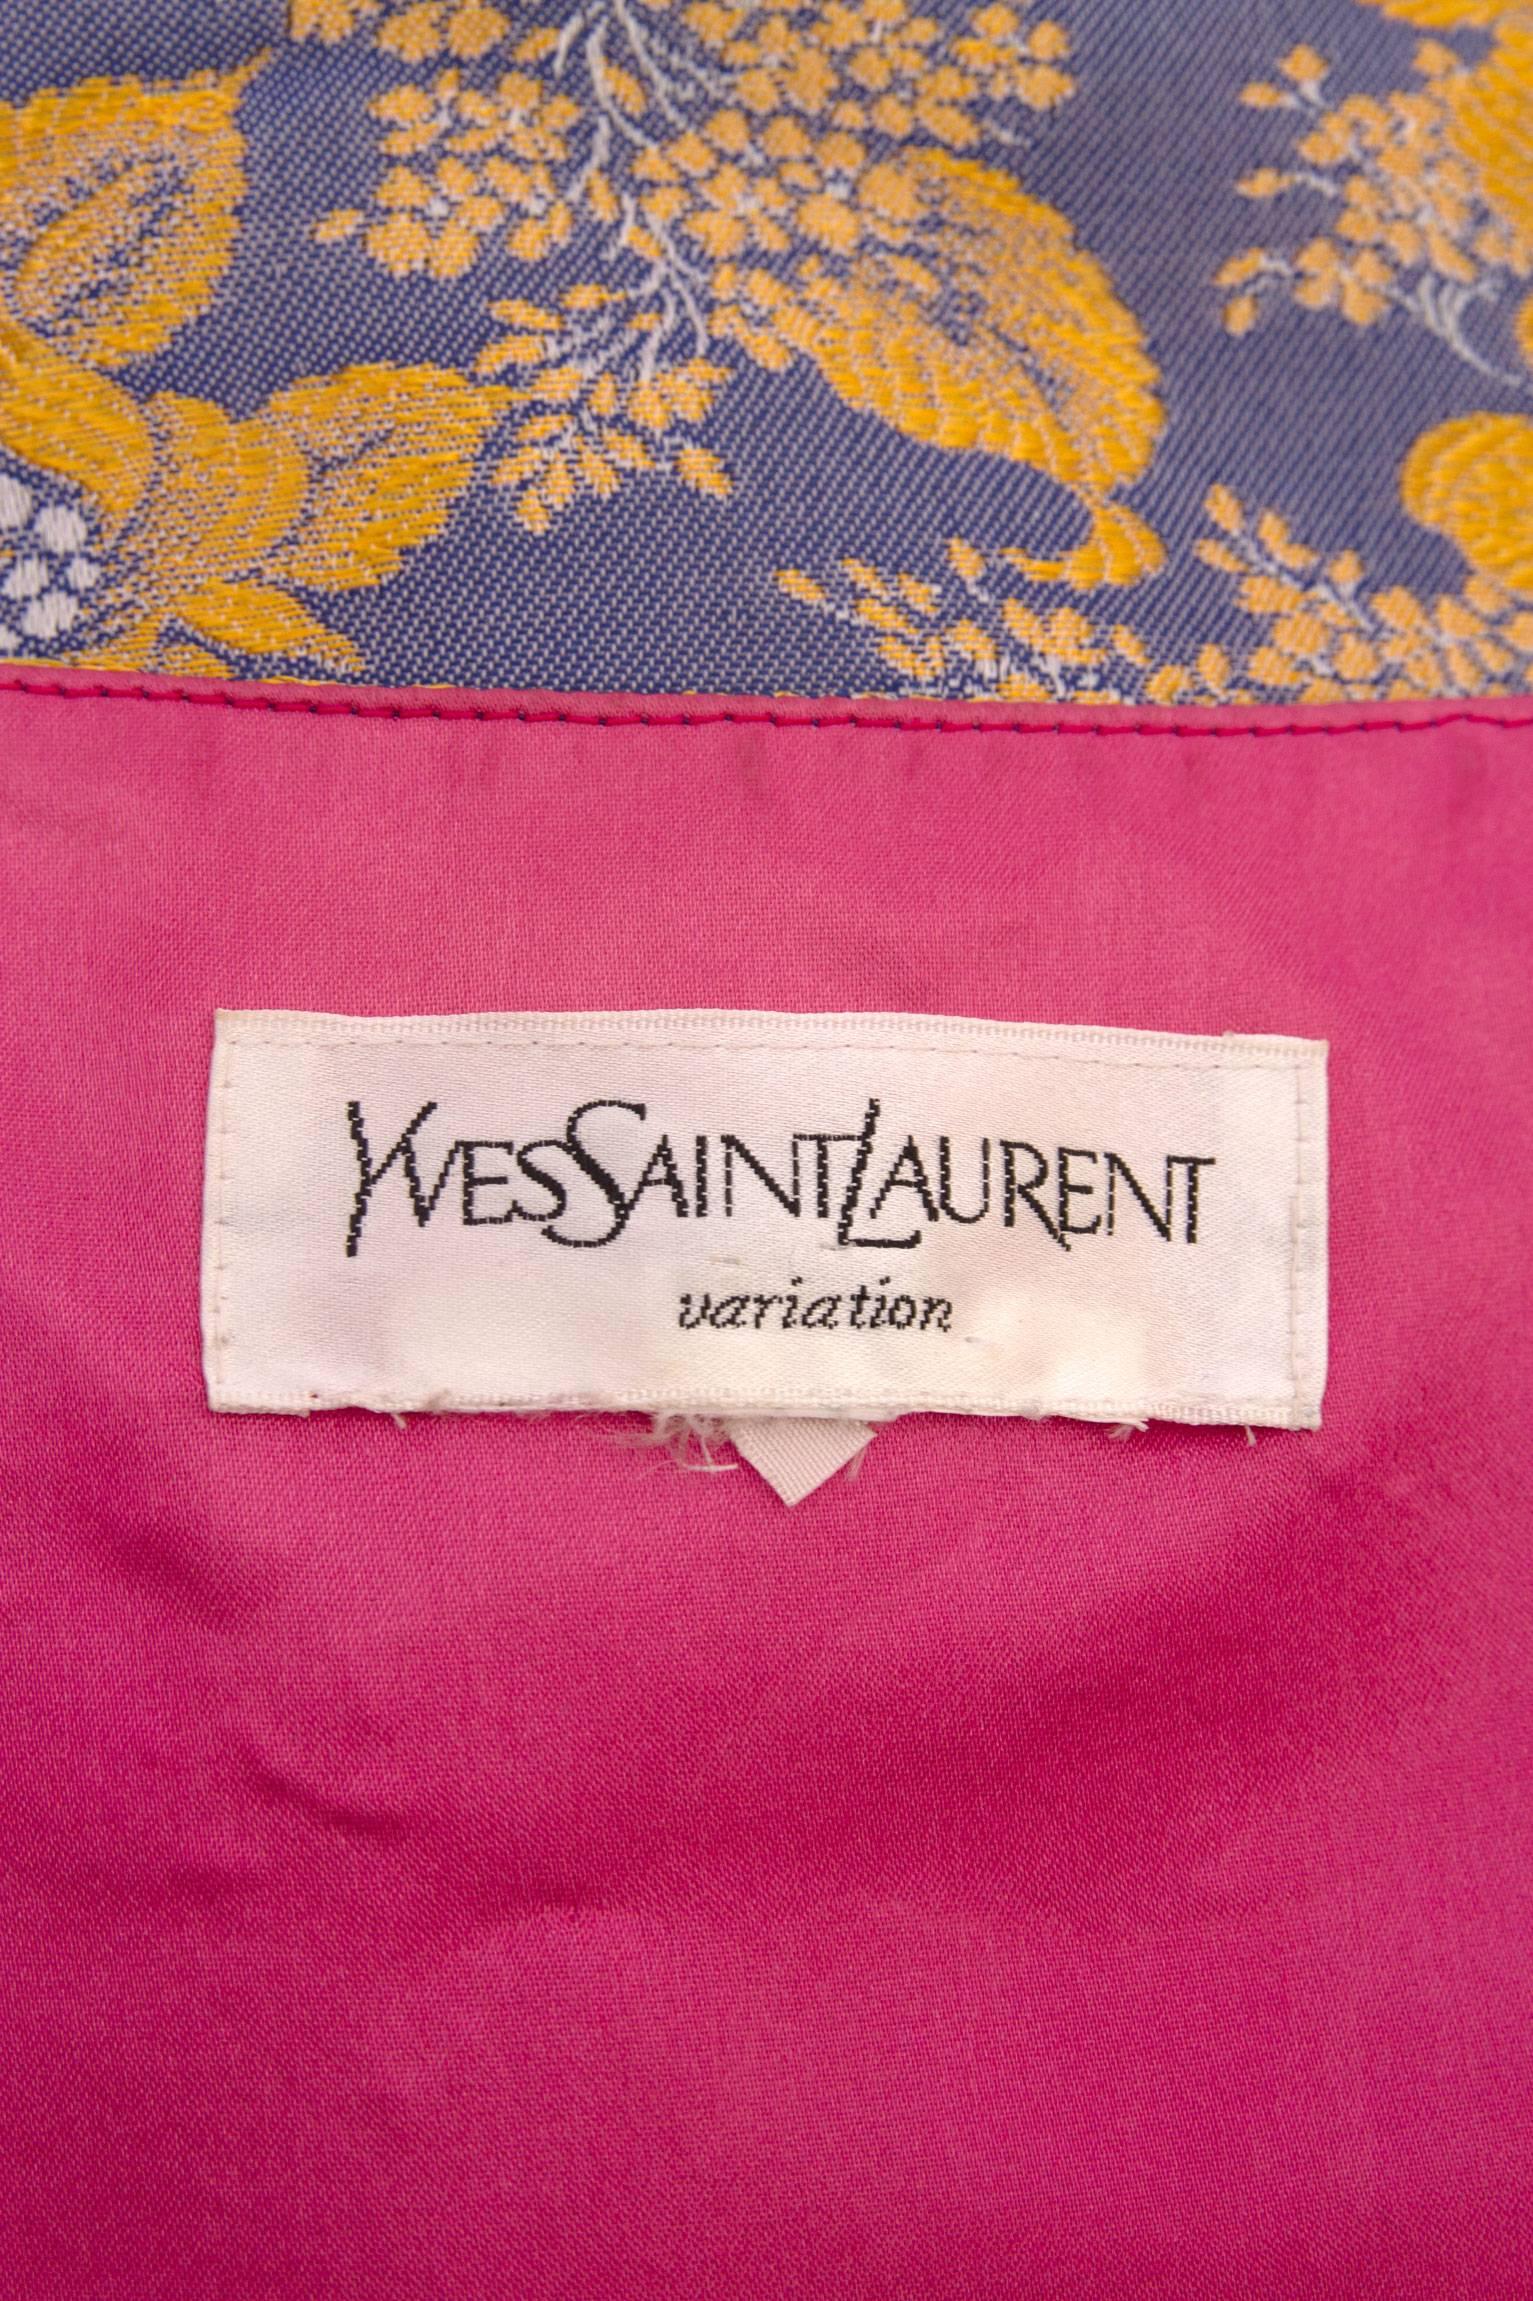 A gorgeous 1980s Yves Saint Laurent open brocade vest in purple and gold. The cropped waistcoat has a row of large gold buttons on each side of the open front. All the buttons are embellished with a large rhinestone setting. The vest is fully lined